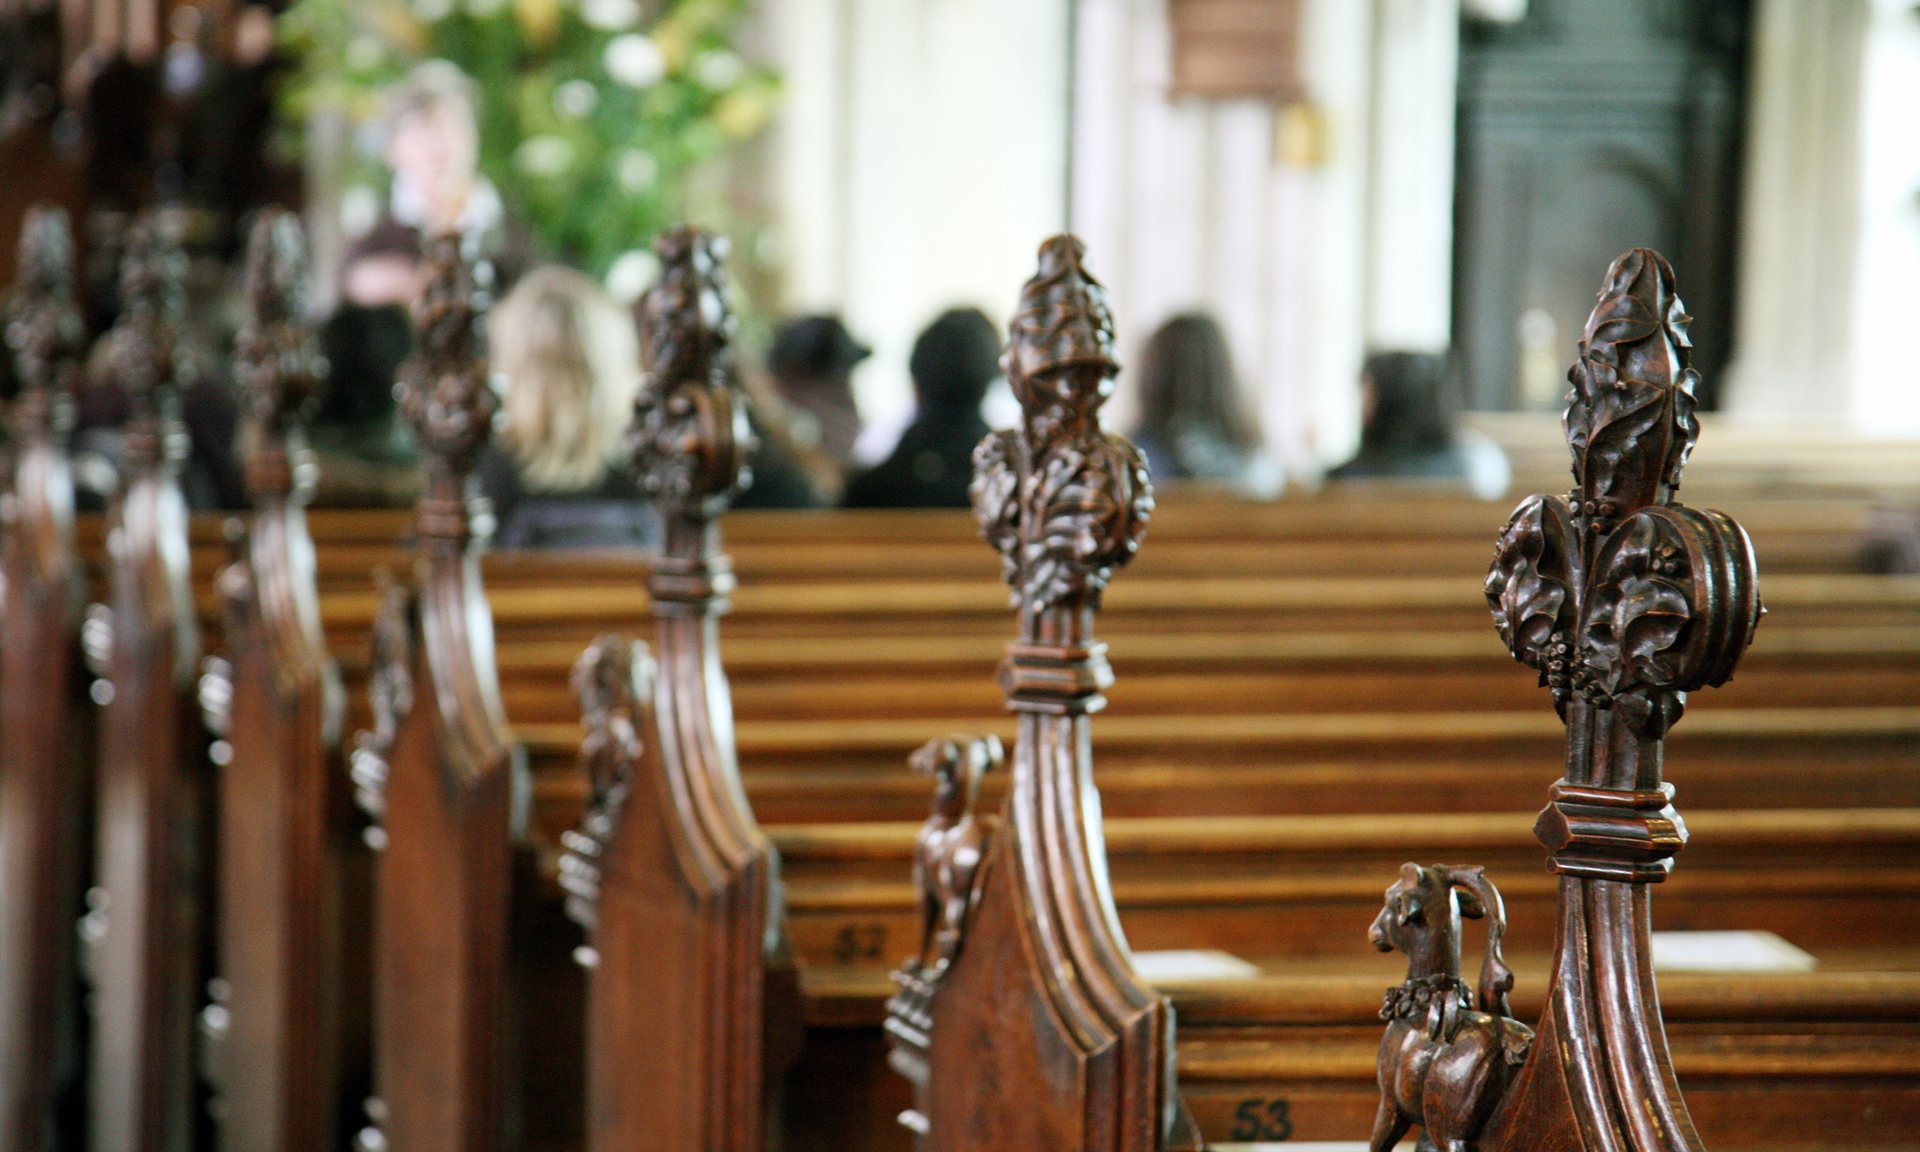 People of no religion outnumber Christians in England and Wales